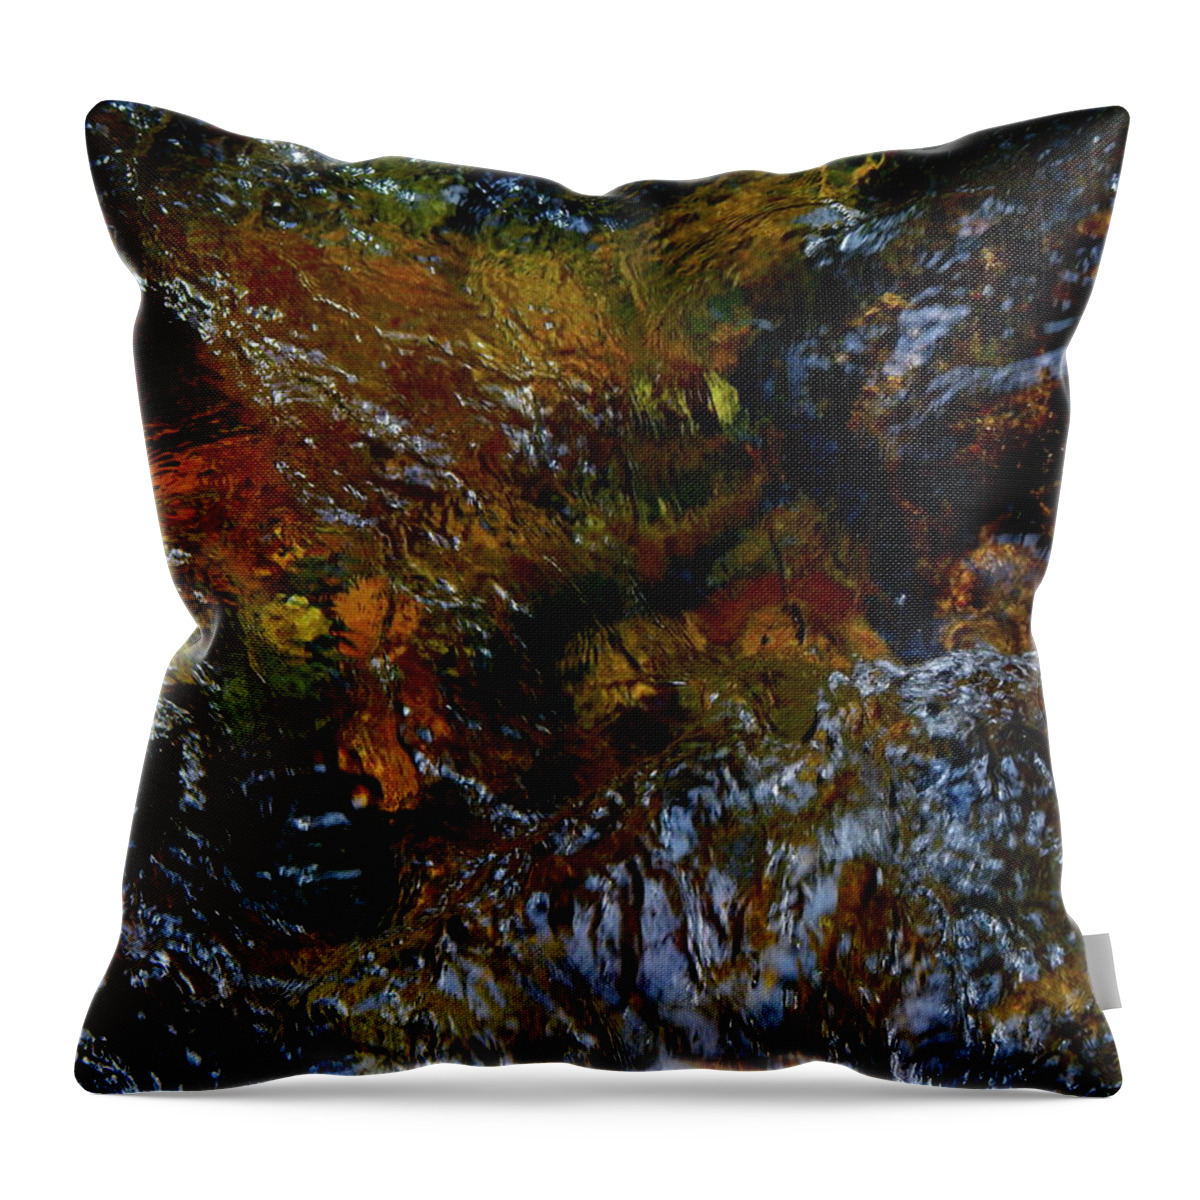 Color Close-up Landscape Throw Pillow featuring the photograph Spring 2017 109 by George Ramos